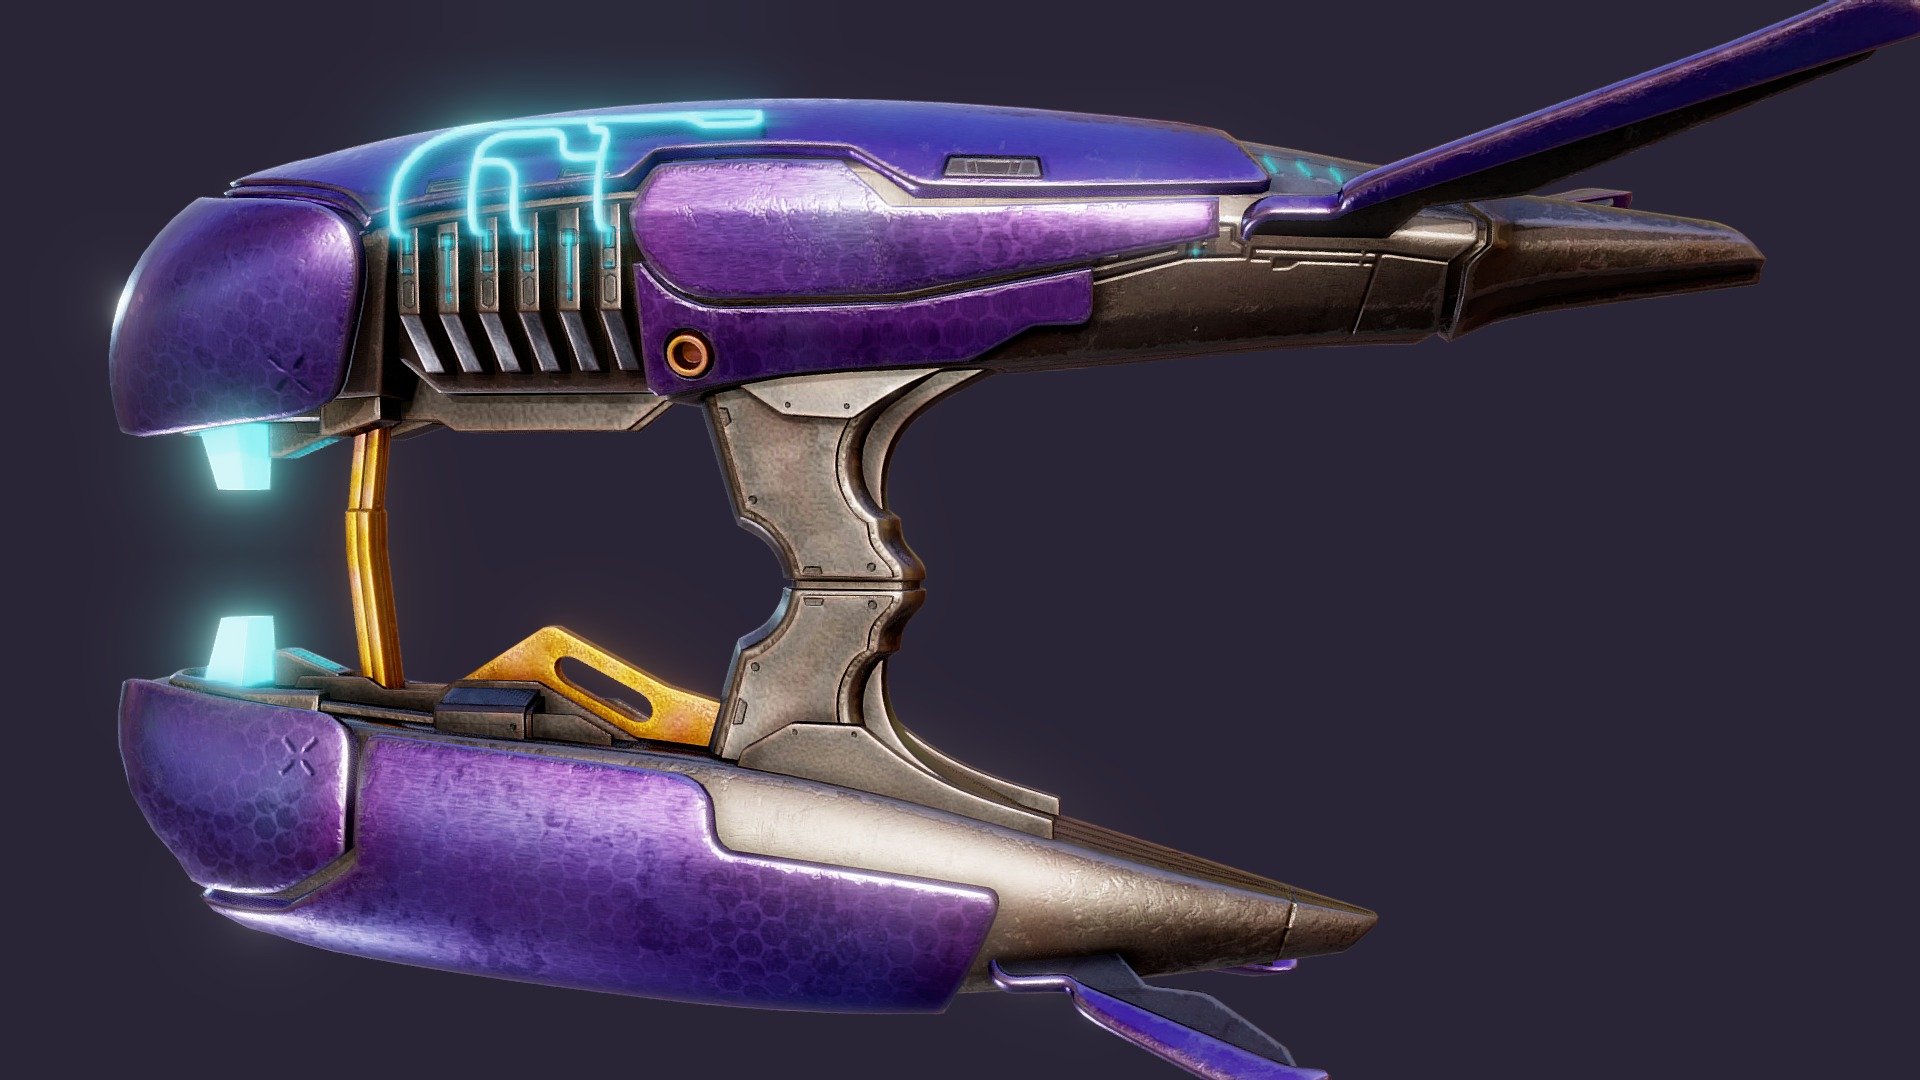 And here's the plasma rifle I made for the Elite. It was harder to make than I thought. The organic shapes in this gun were quite difficult to model for some reason. I guess I'm not very good at making organic 3D models, but that just means I need to do more of this stuff. I'm definitely not done making organic looking halo guns and characters!

Hope you like it man!!!1 - Halo Plasma Rifle - 3D model by Joe-Louis (@Dikkiedik) 3d model